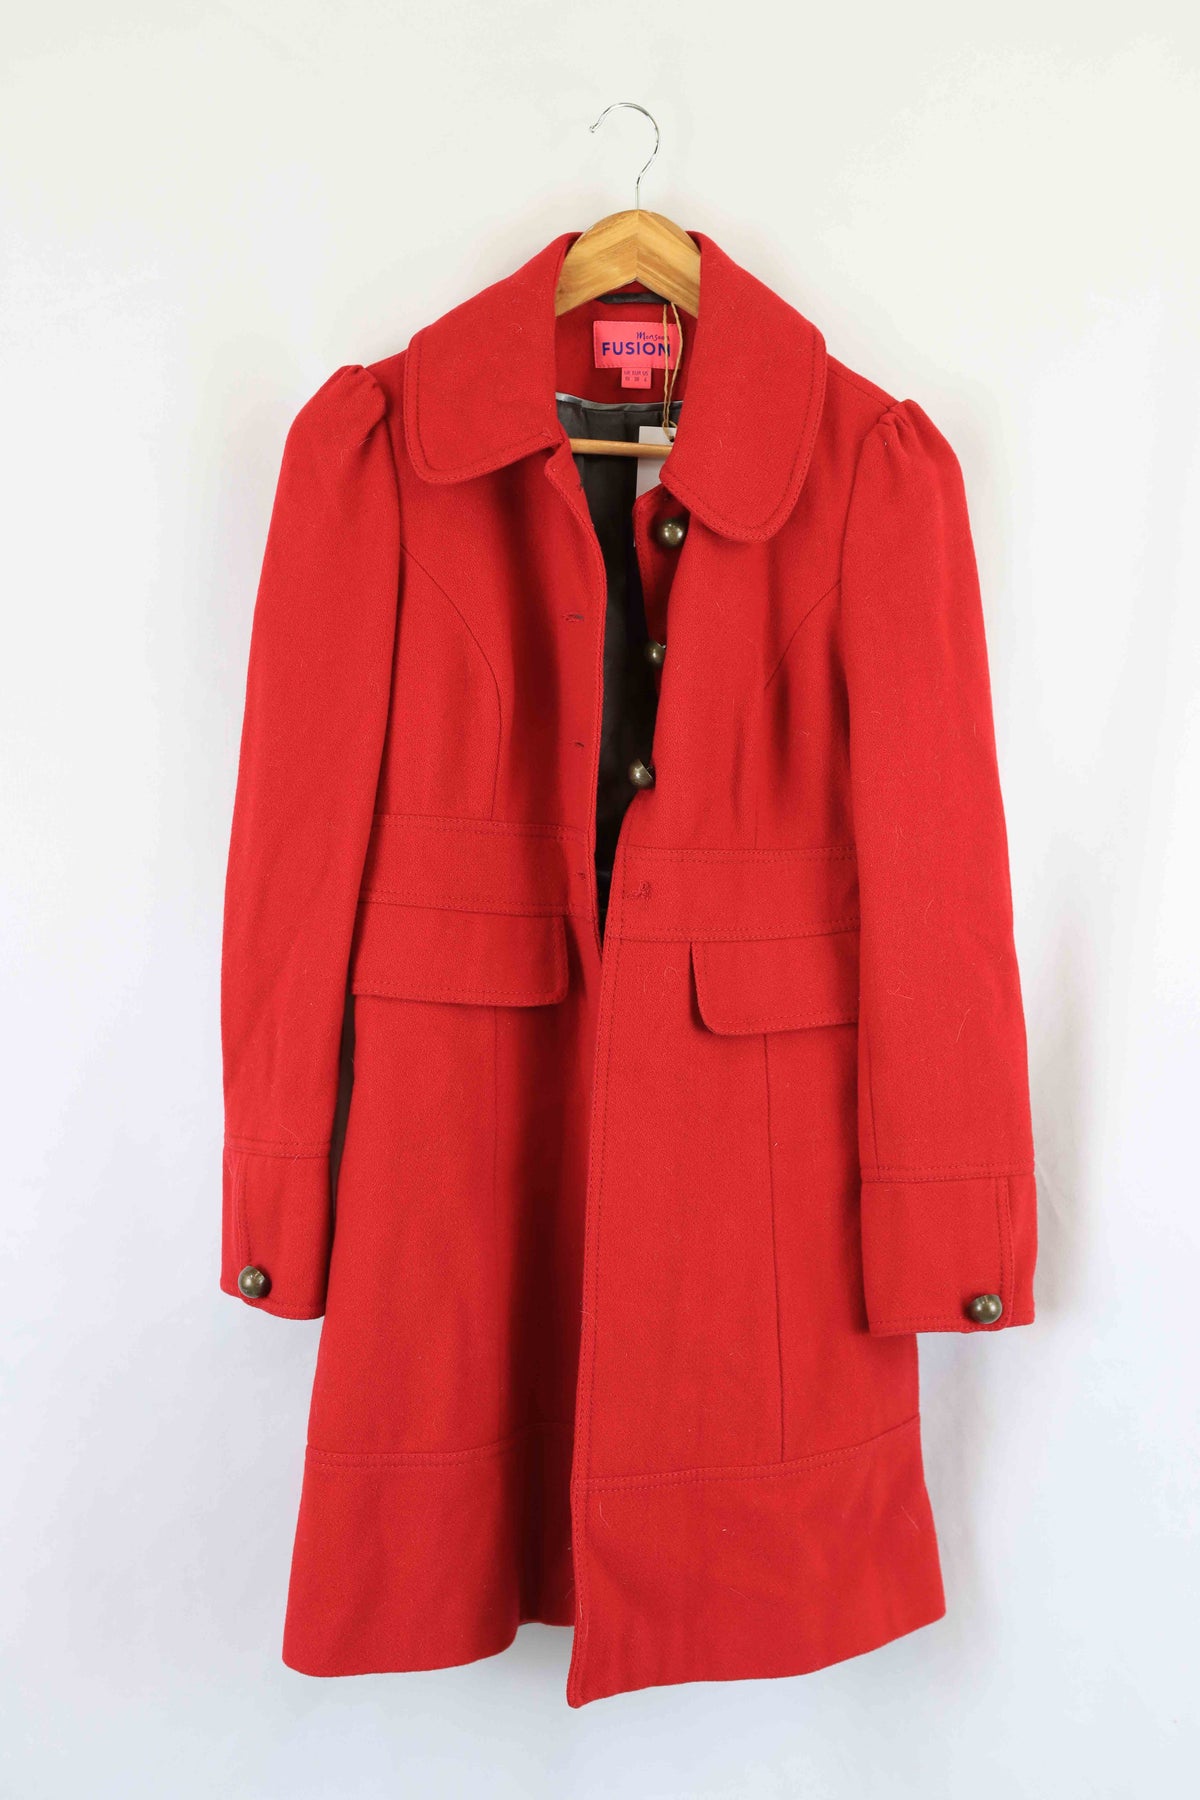 Monsoon Fusion Red Jacket 10